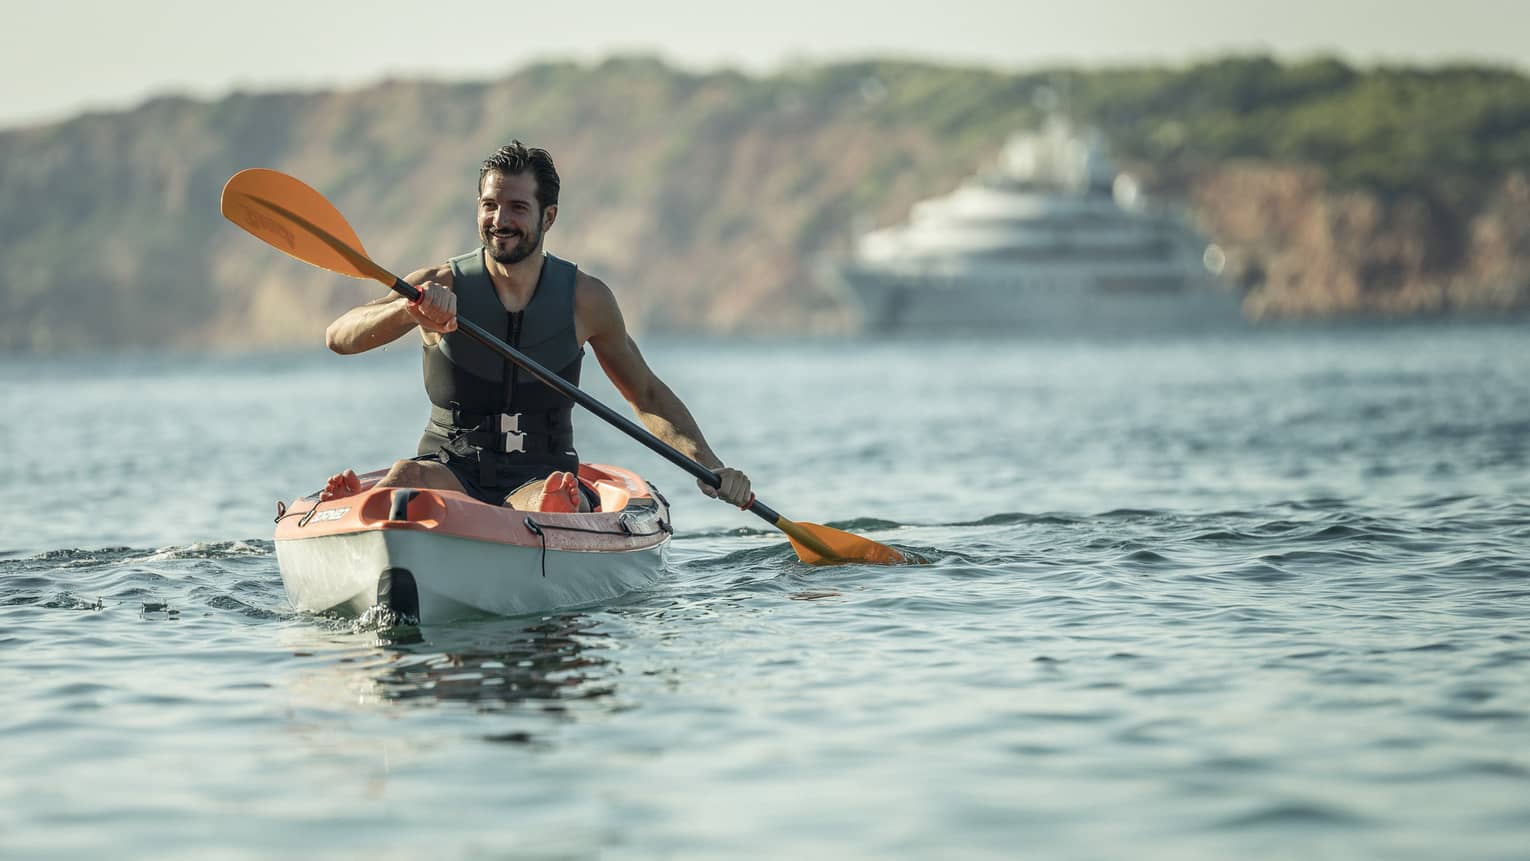 Man smiling while kayaking in sea, yacht and rocky coast in backdrop